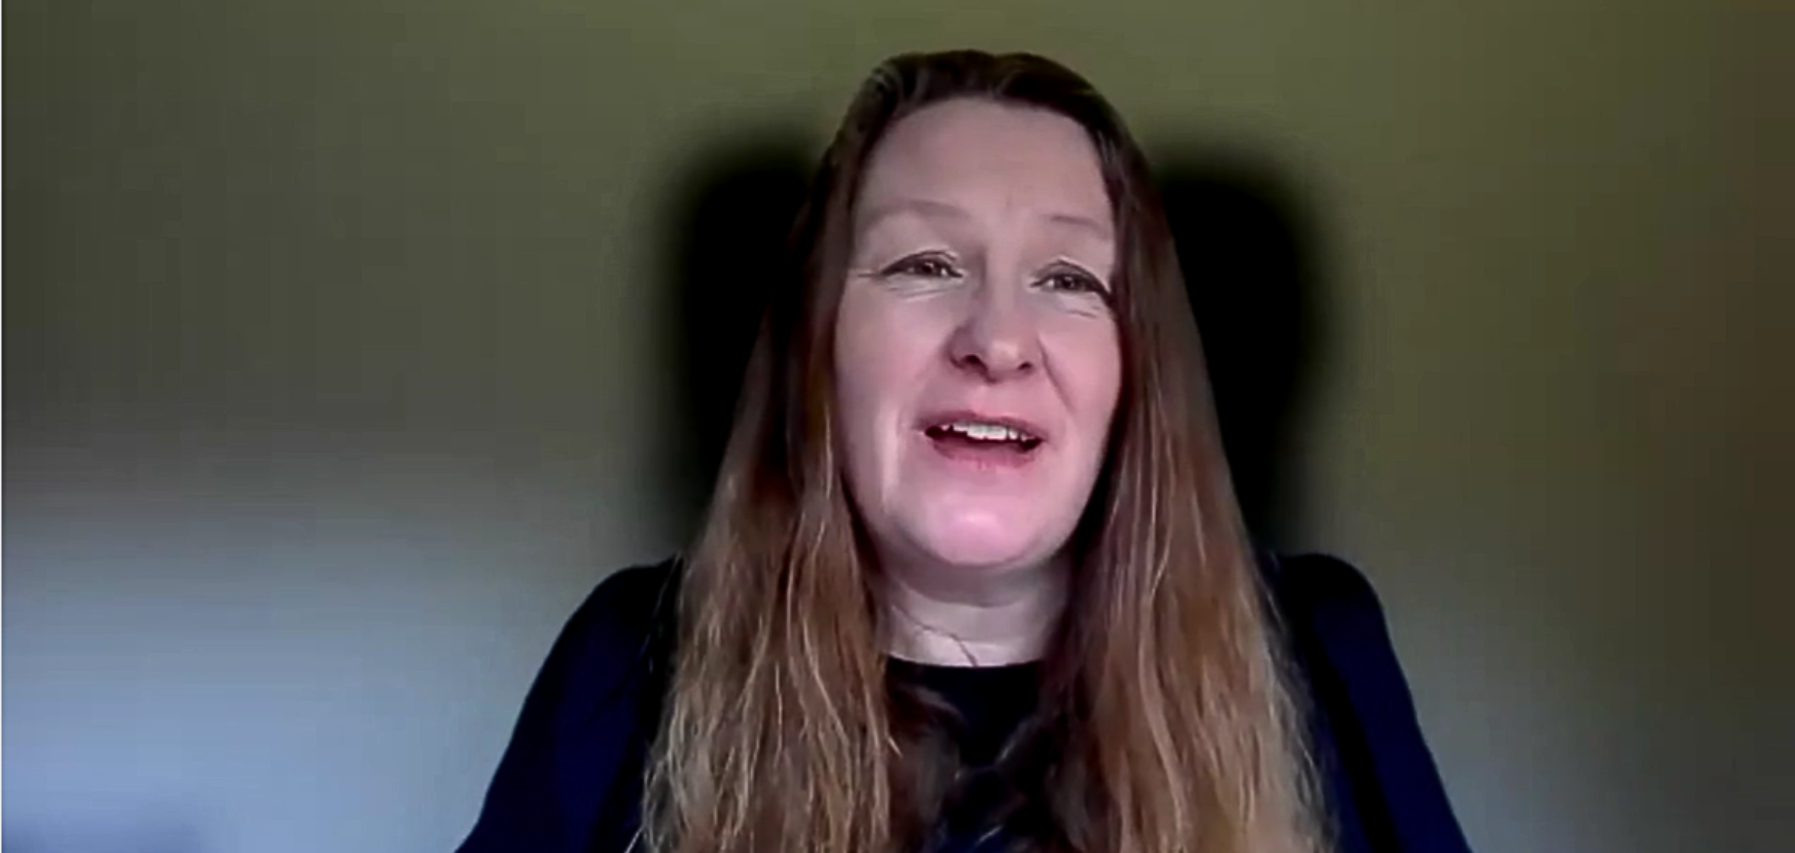 Screenshot captured during Helen's live webinar. Helen is wearing black and has long brown hair. She is talking directly at the camera.